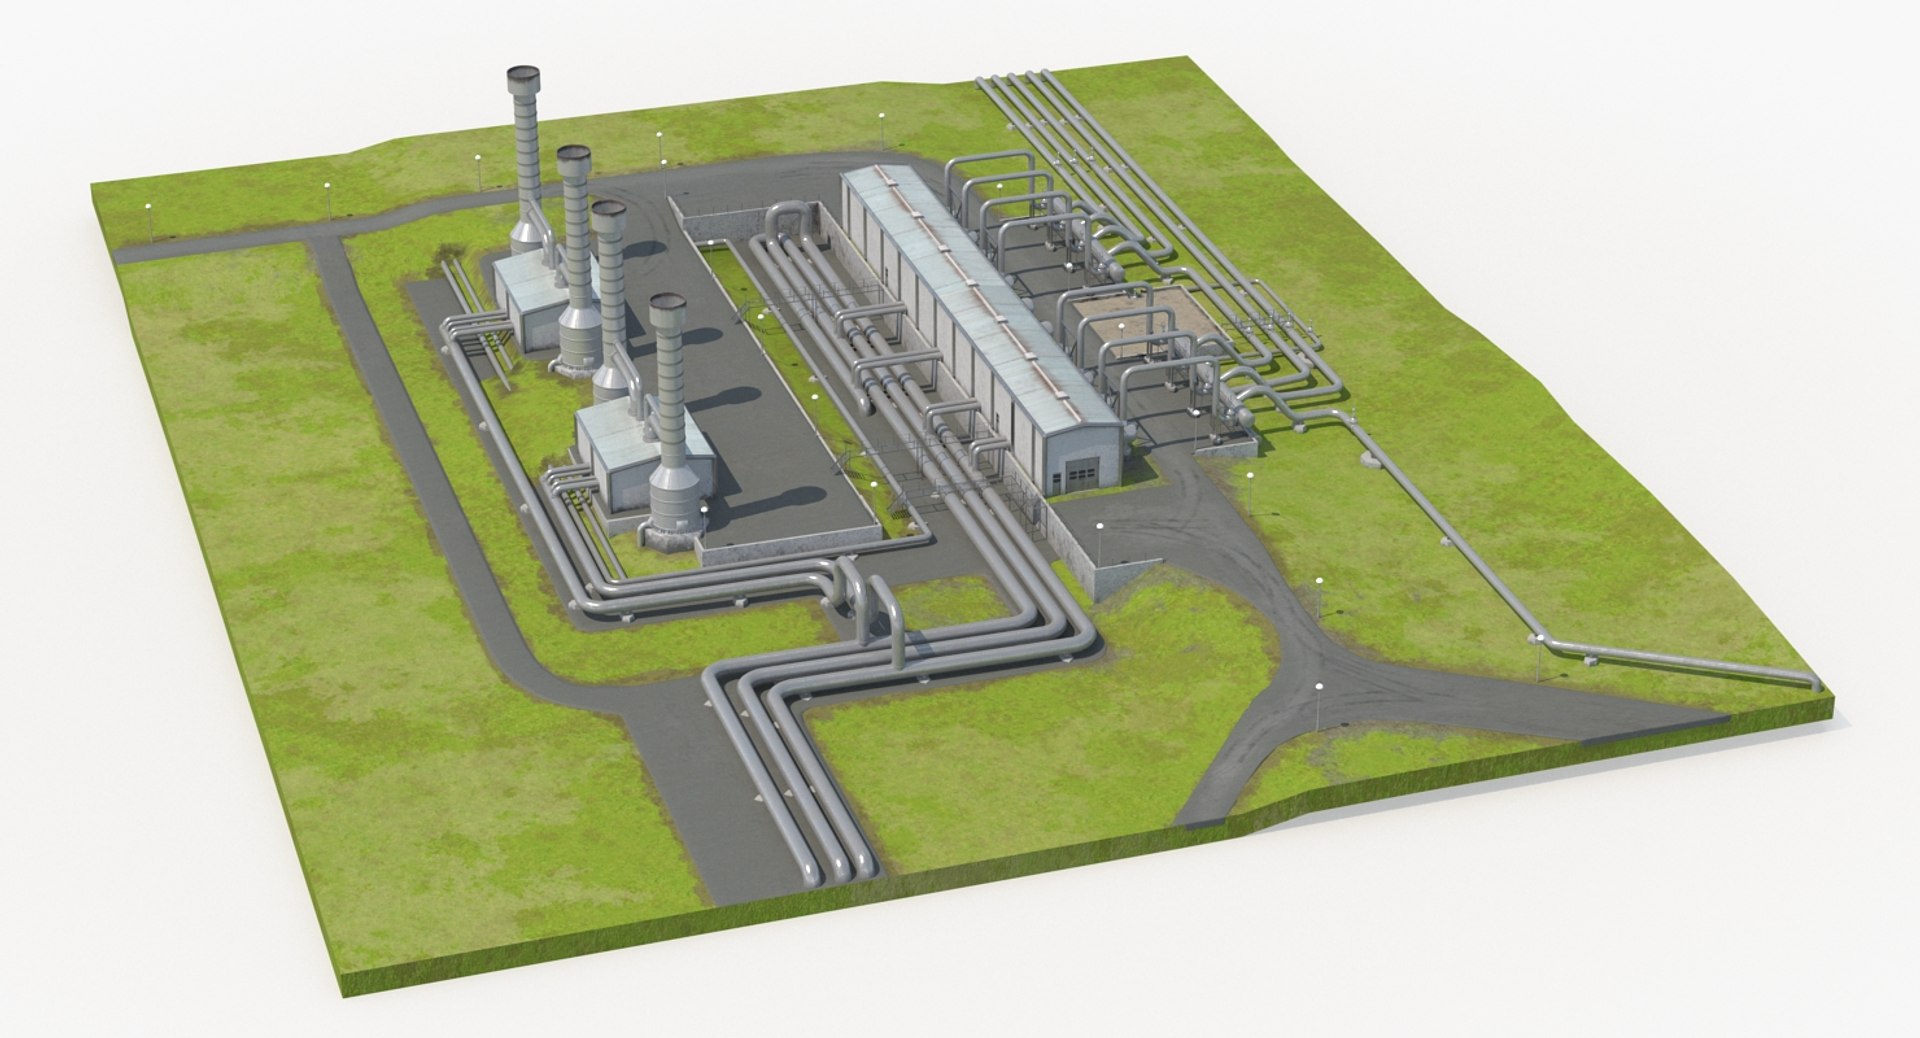 geothermal power plant layout